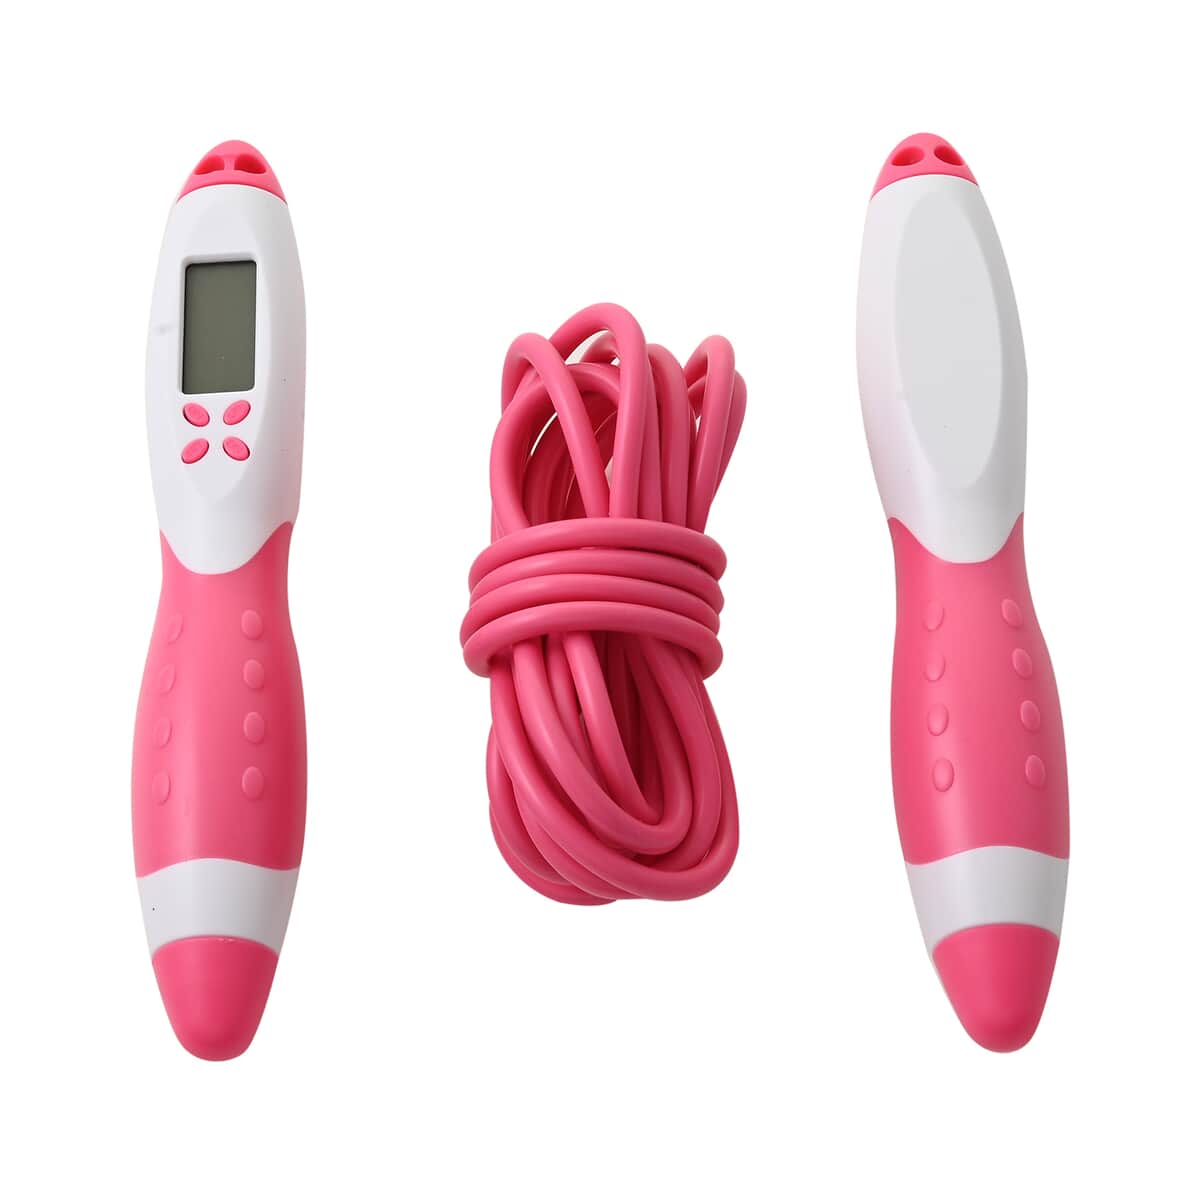 SoulSmart Electric Digital Jump Rope Set (Wireless Short Rope, 9ft Long Rope, Battery & Tool) Pink & White image number 0